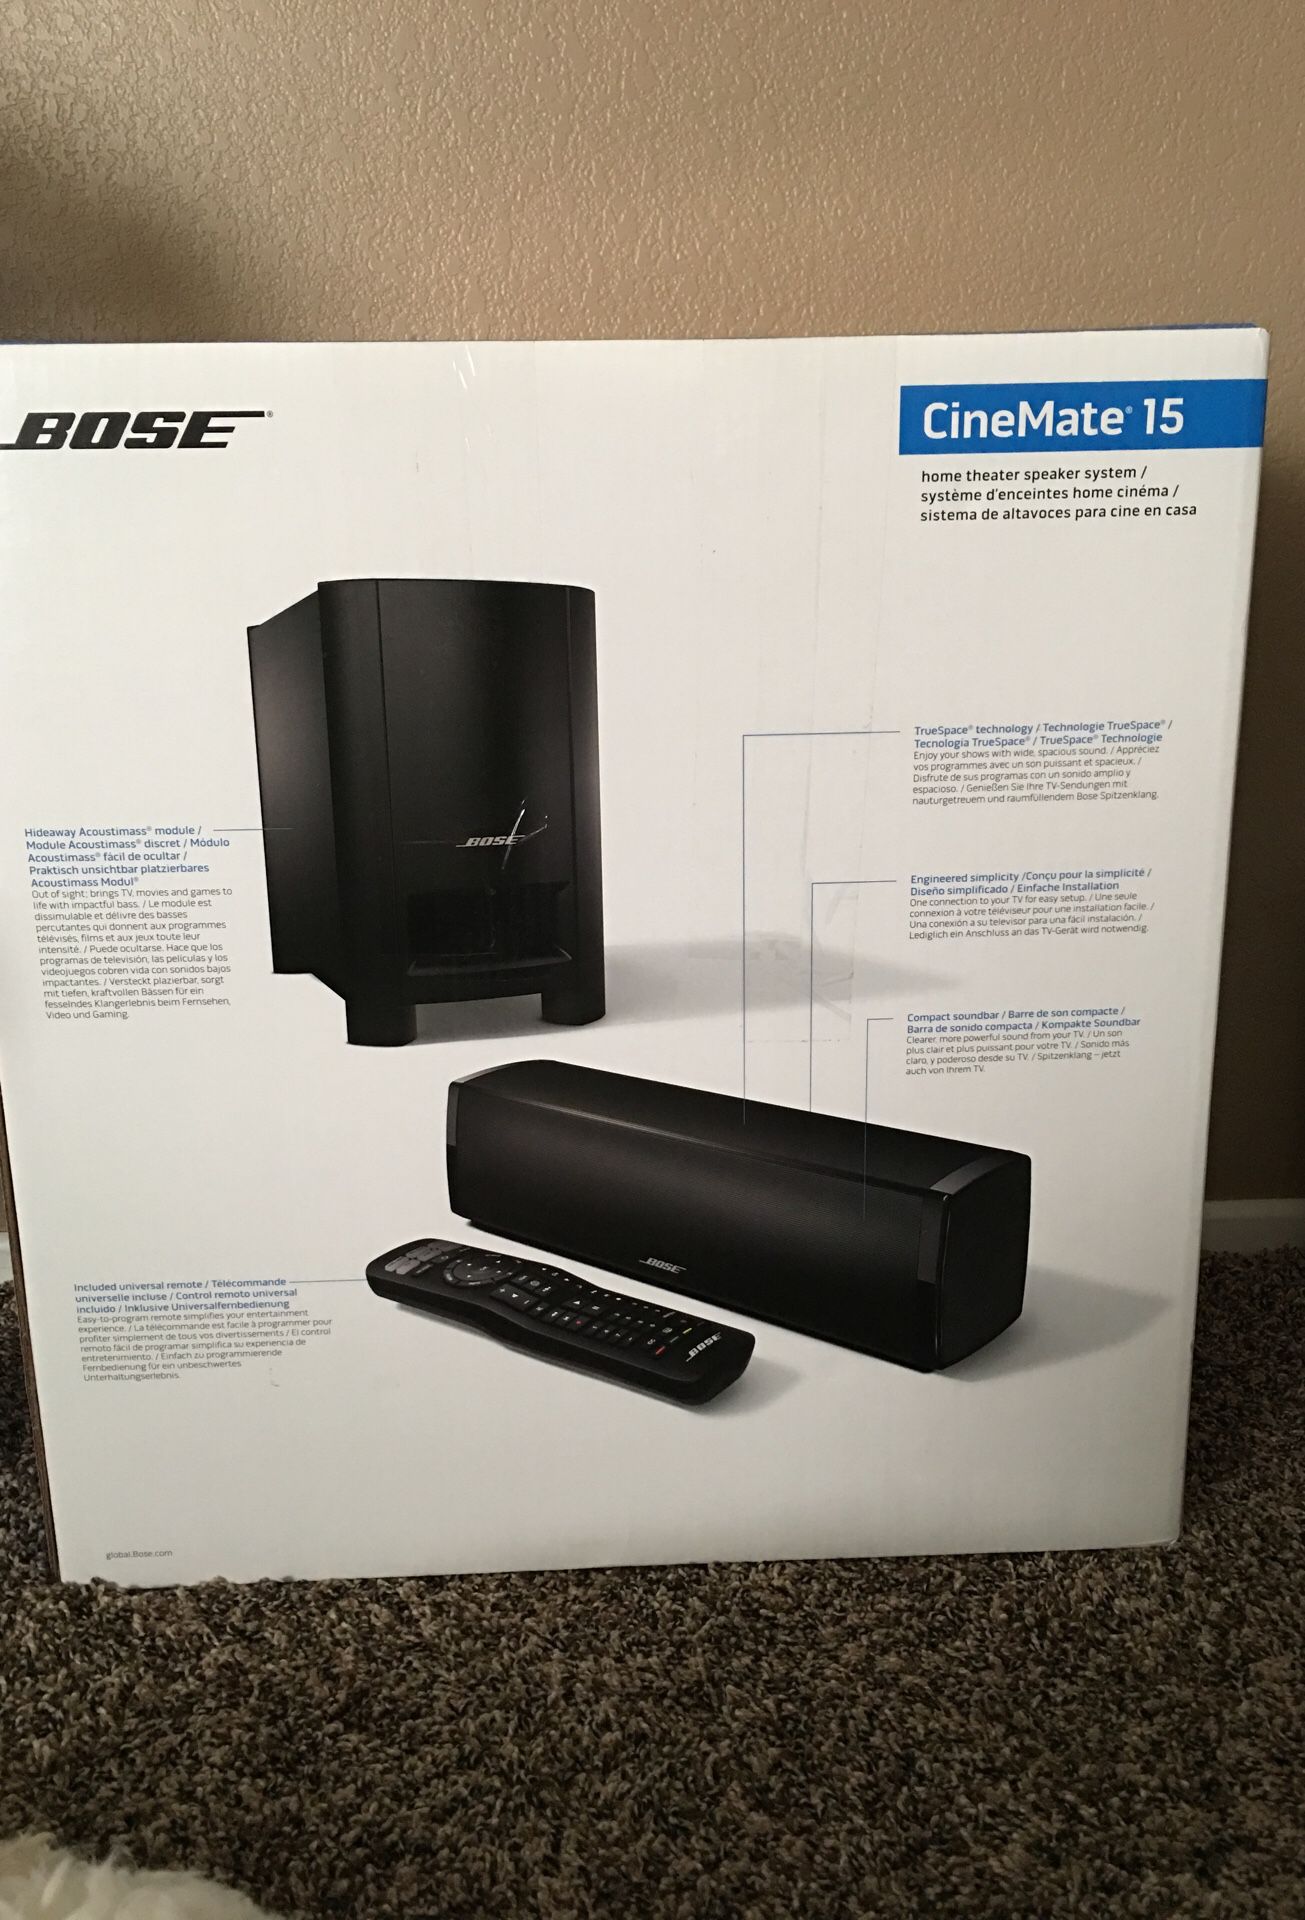 Bose CineMate 15 home theater.